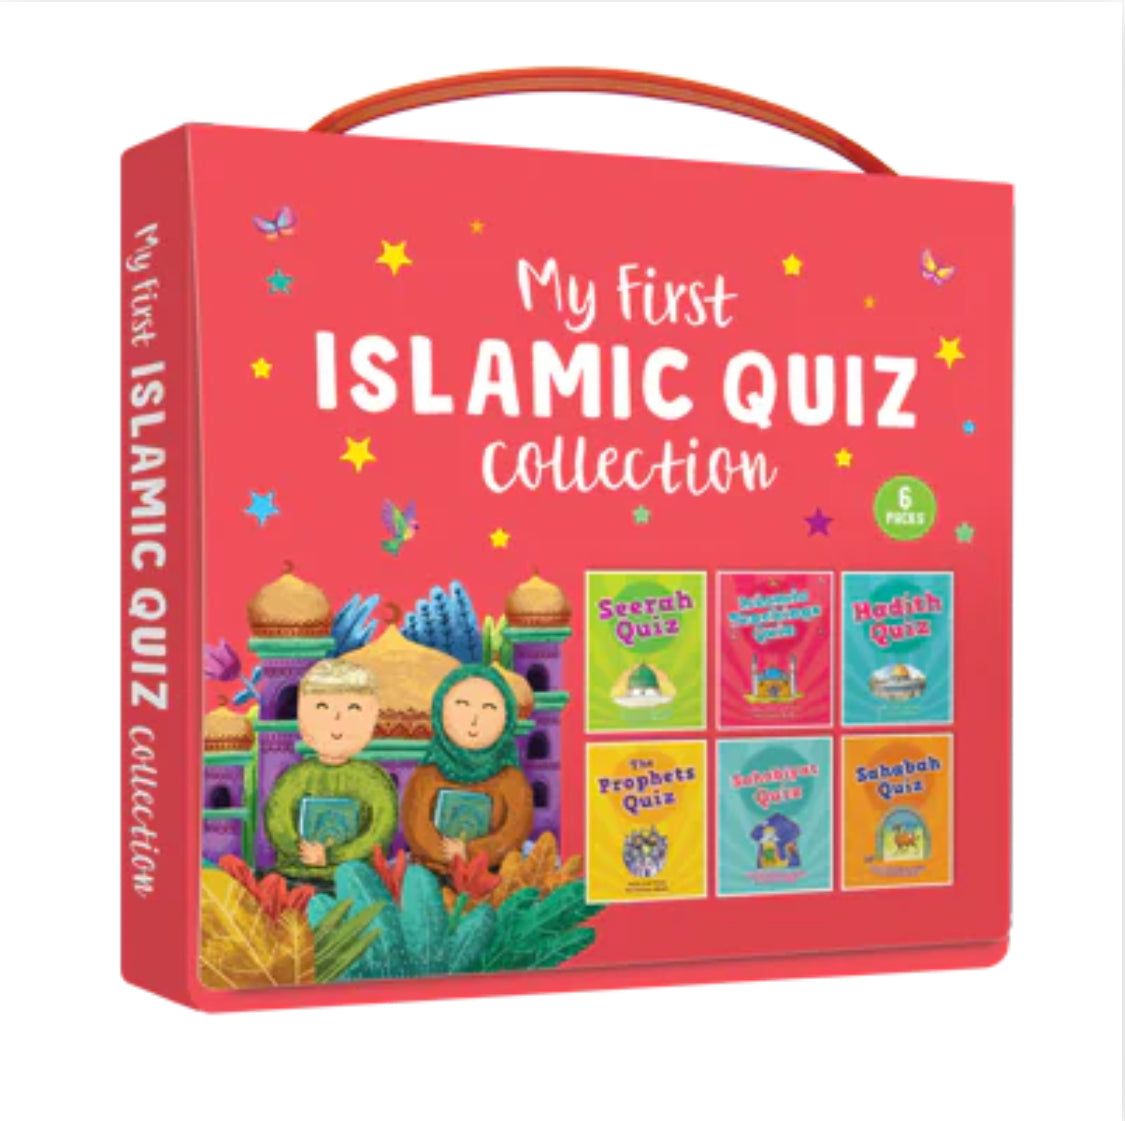 My First Islamic Quiz Collection (6 packs)